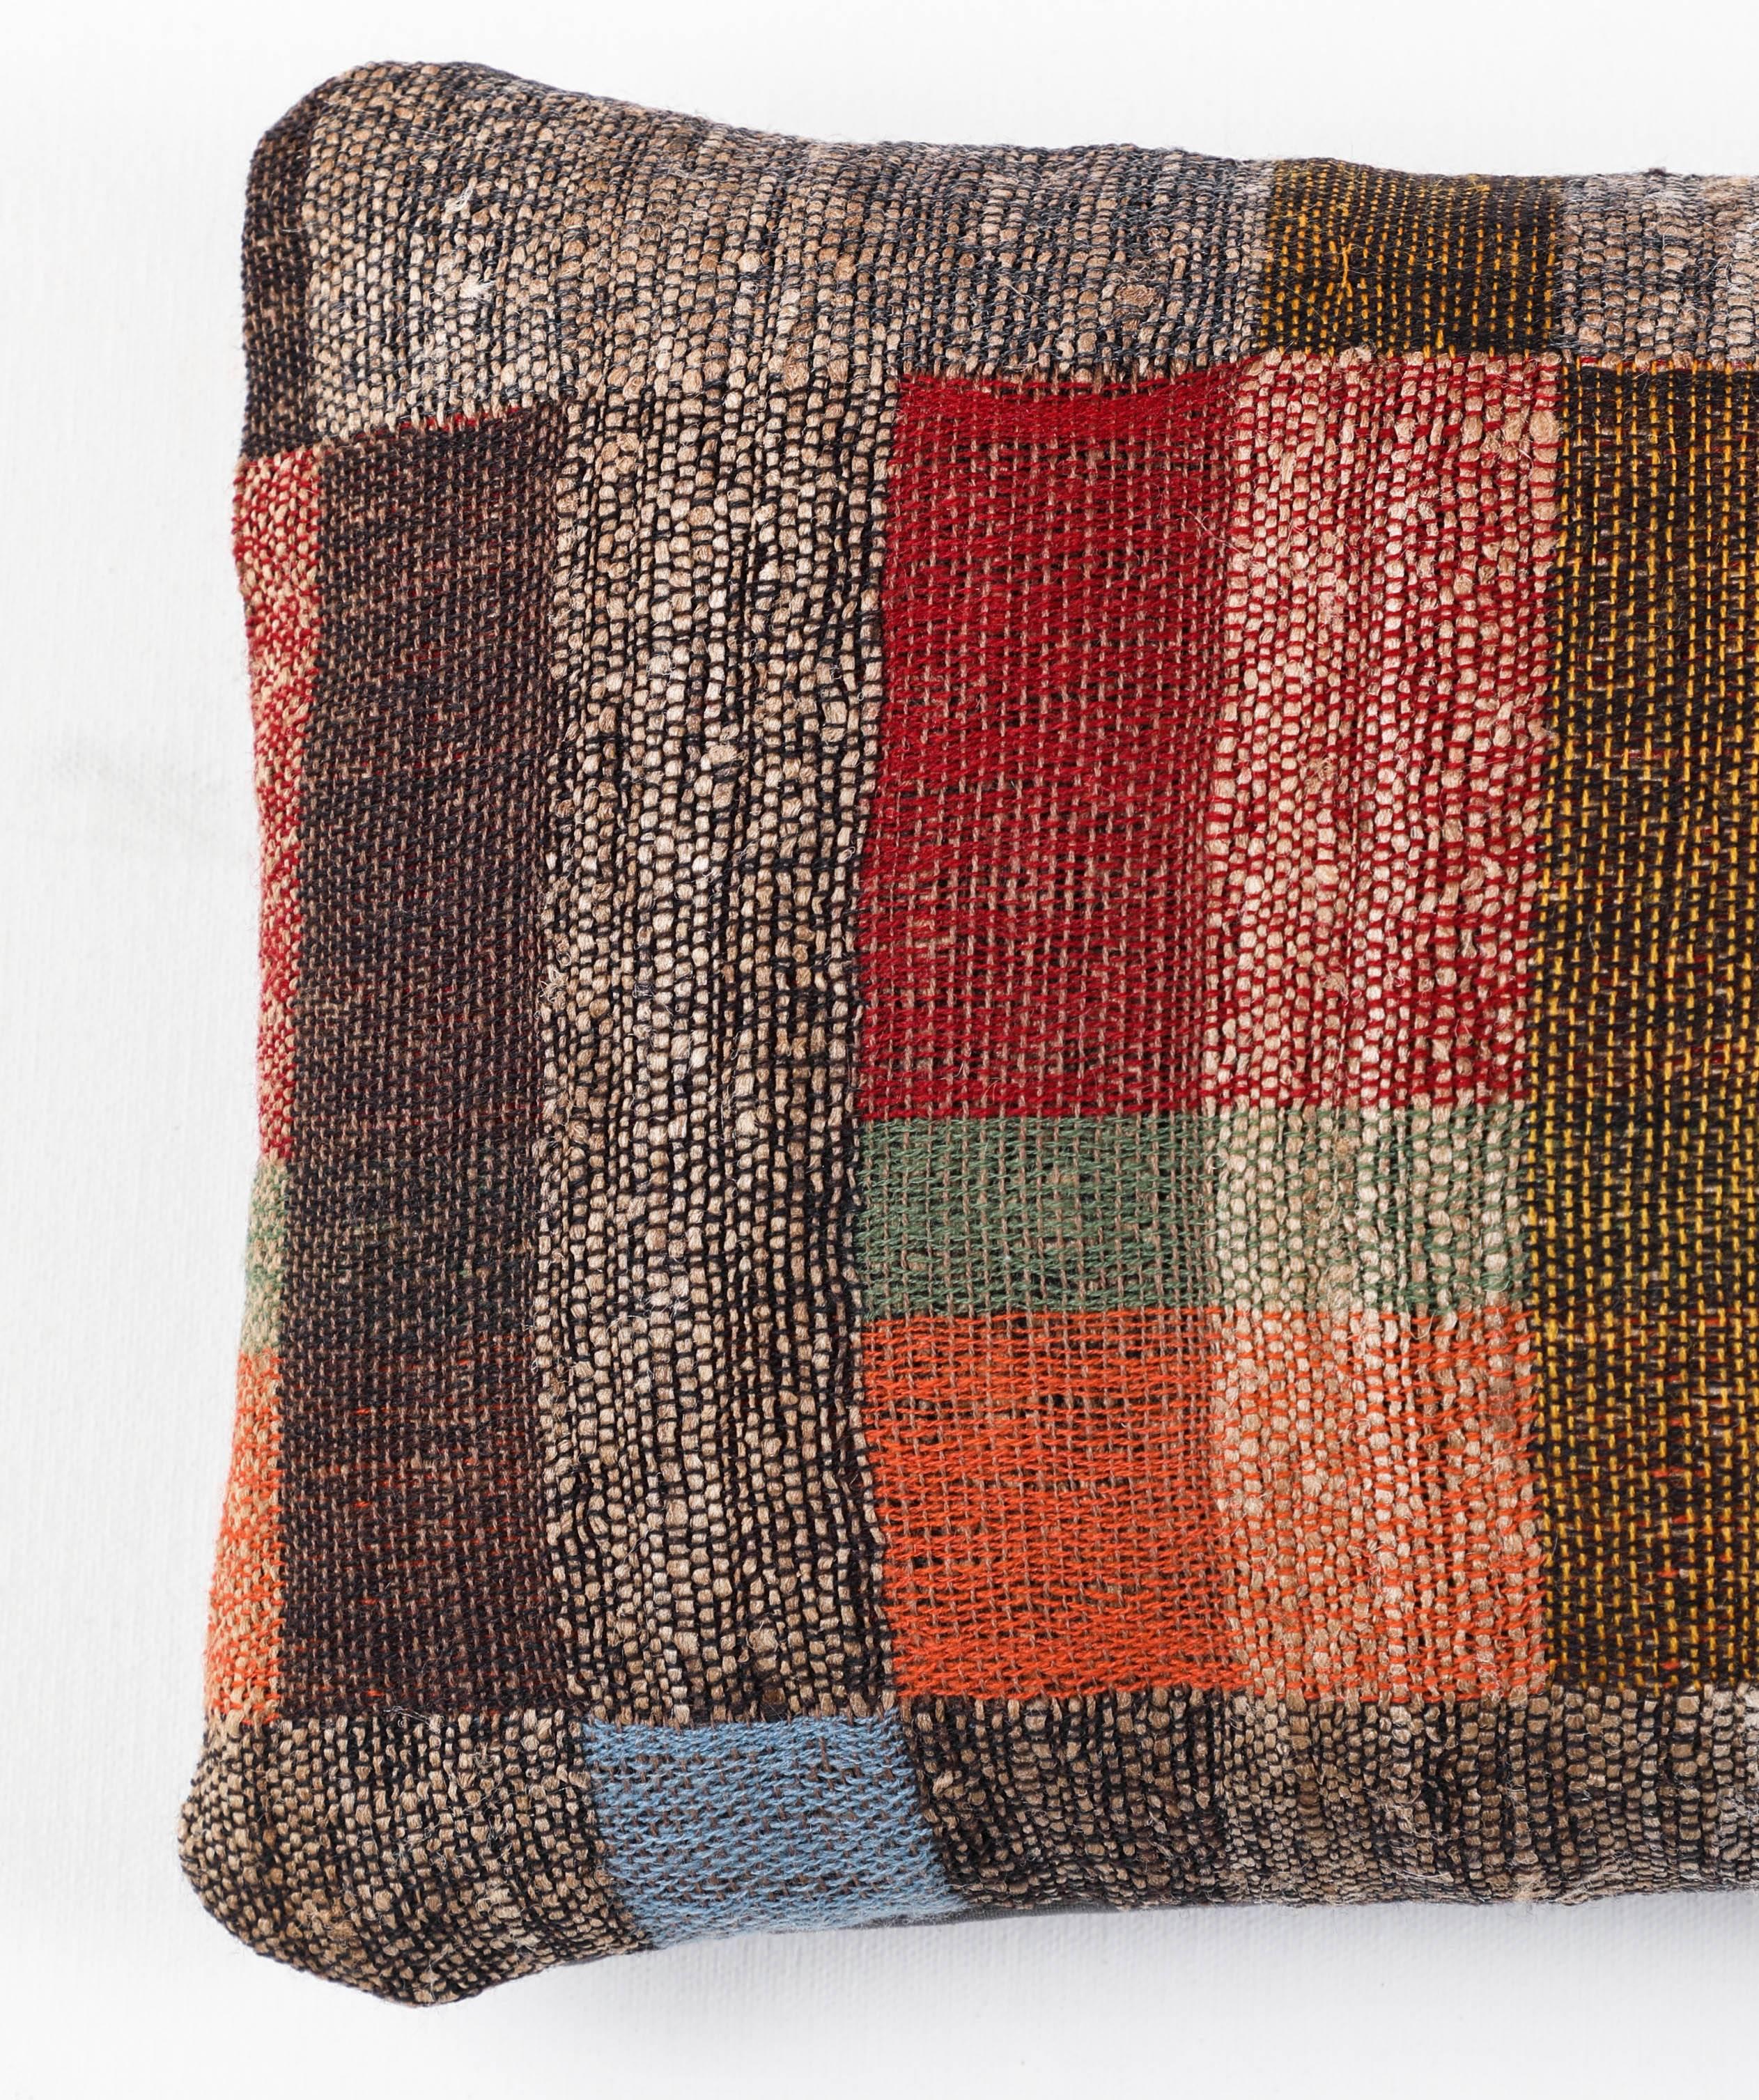 Pat McGann Workshop
A contemporary line of cushions, pillows, throws, bedcovers, bedspreads and yardage hand woven in India on antique Jacquard looms. Hand spun wool, cotton, linen, and raw silk give the textiles an appealing uneven quality. Sizes